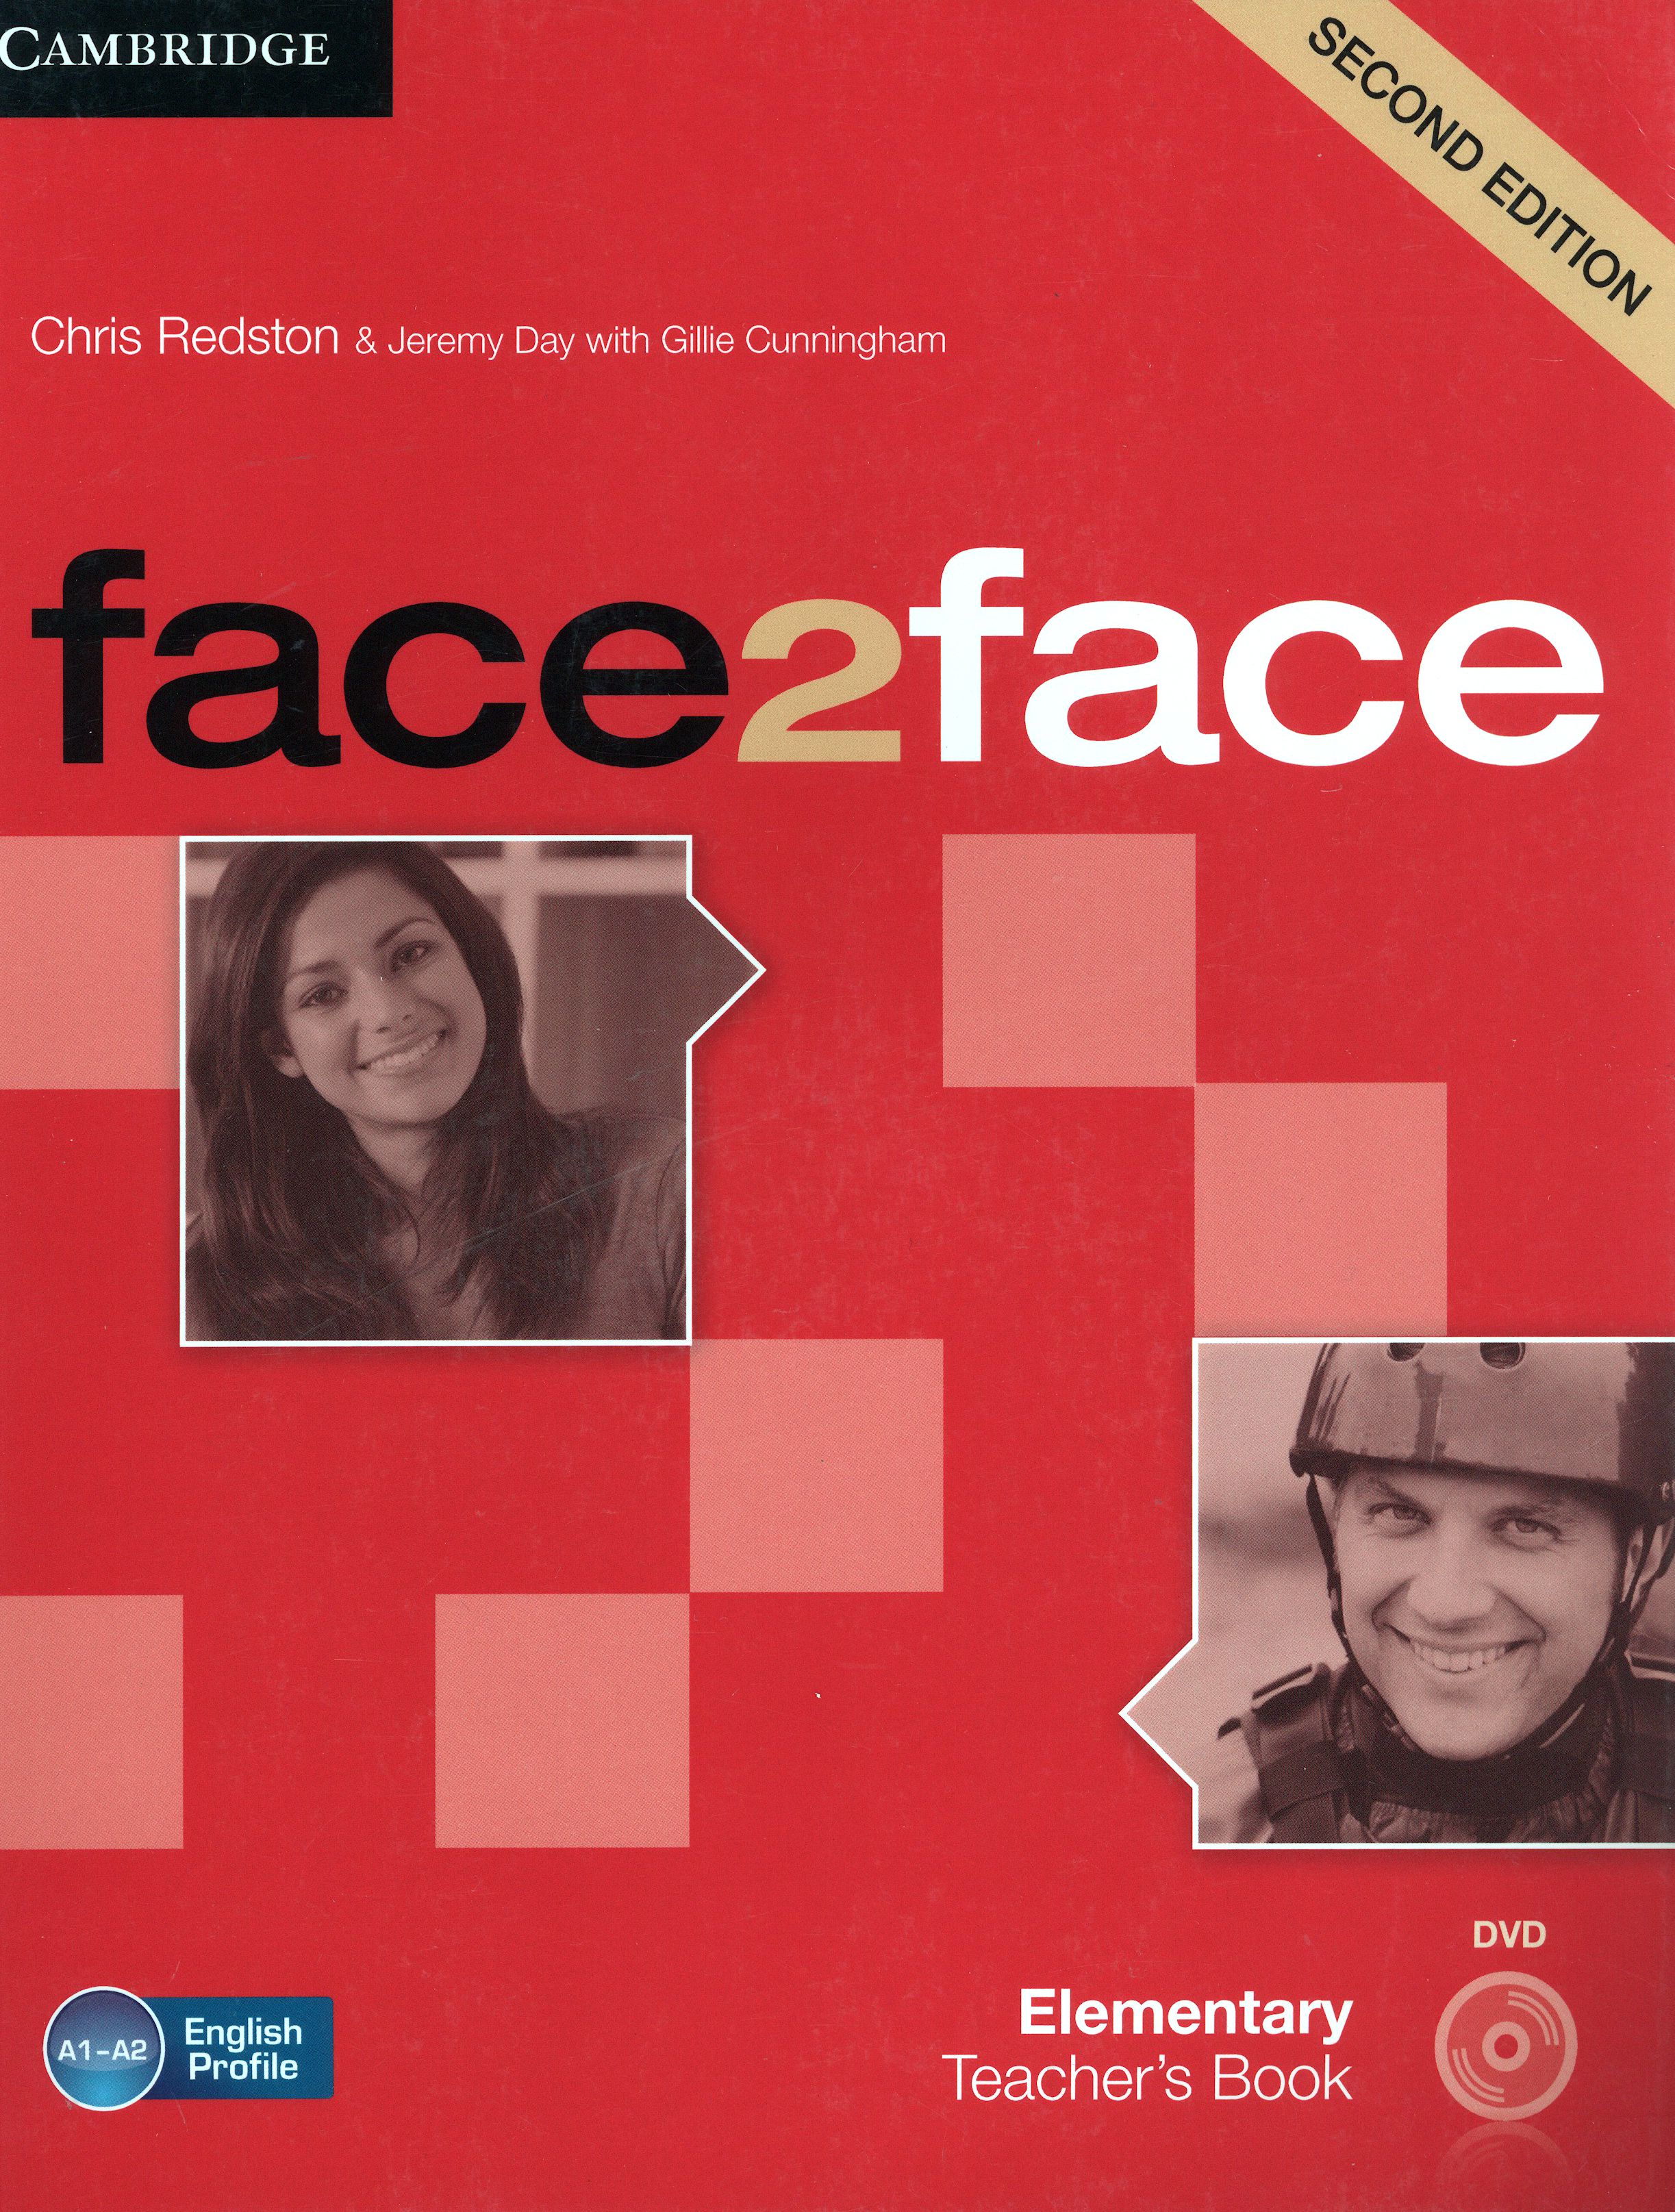 Face2face elementary. Face2face английский язык Elementary. Face2face, Cambridge Elementary внутри. Face2face Elementary книга. Face to face Elementary.